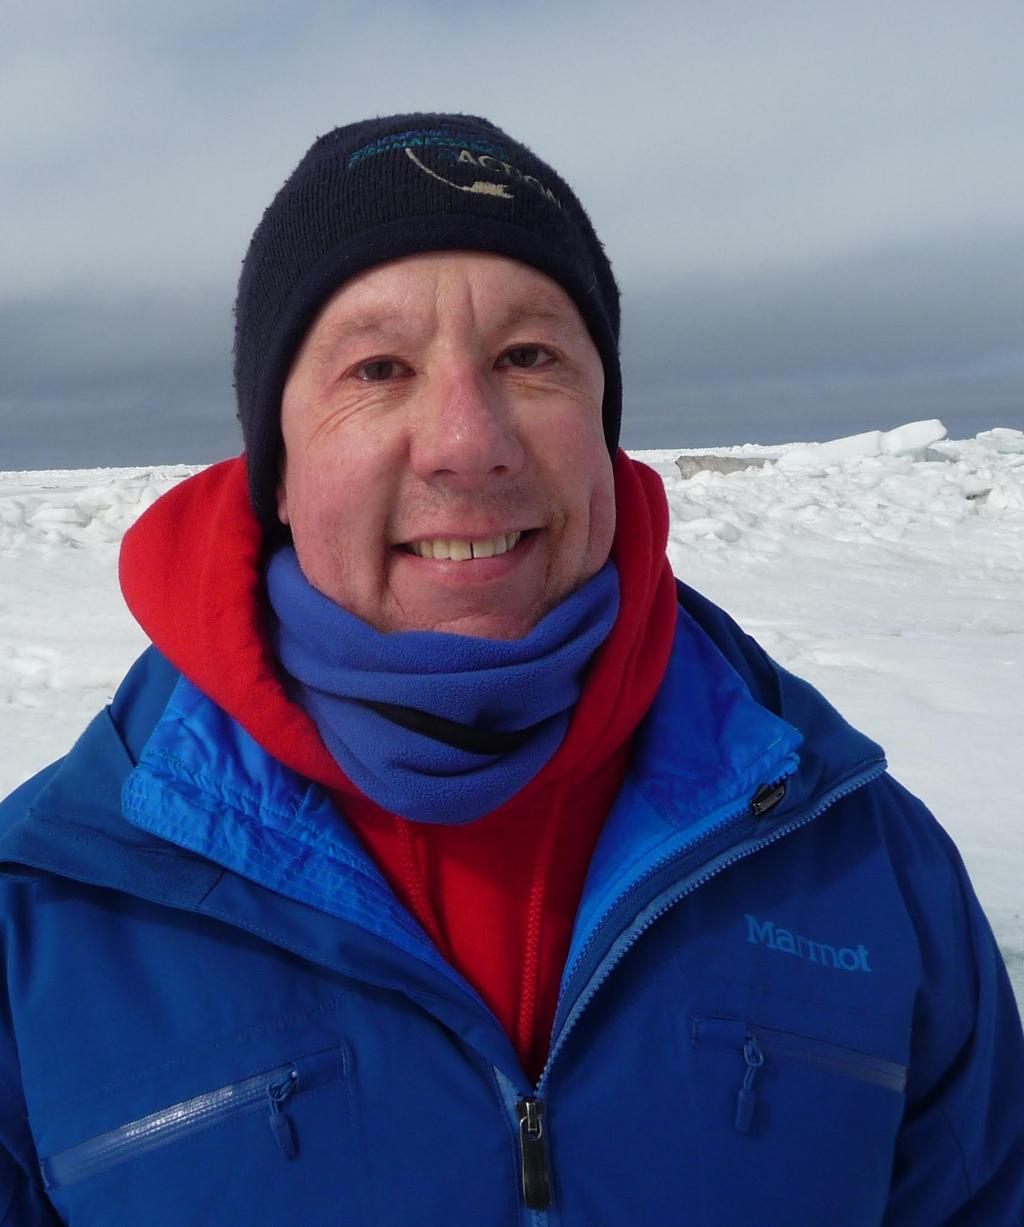 A marine ecologist with a focus on sea ice environments, he has participated in and led collaborative research in the North Pacific Ocean, the Arctic Ocean, the Sea of Okhotsk, the Baltic Sea, and